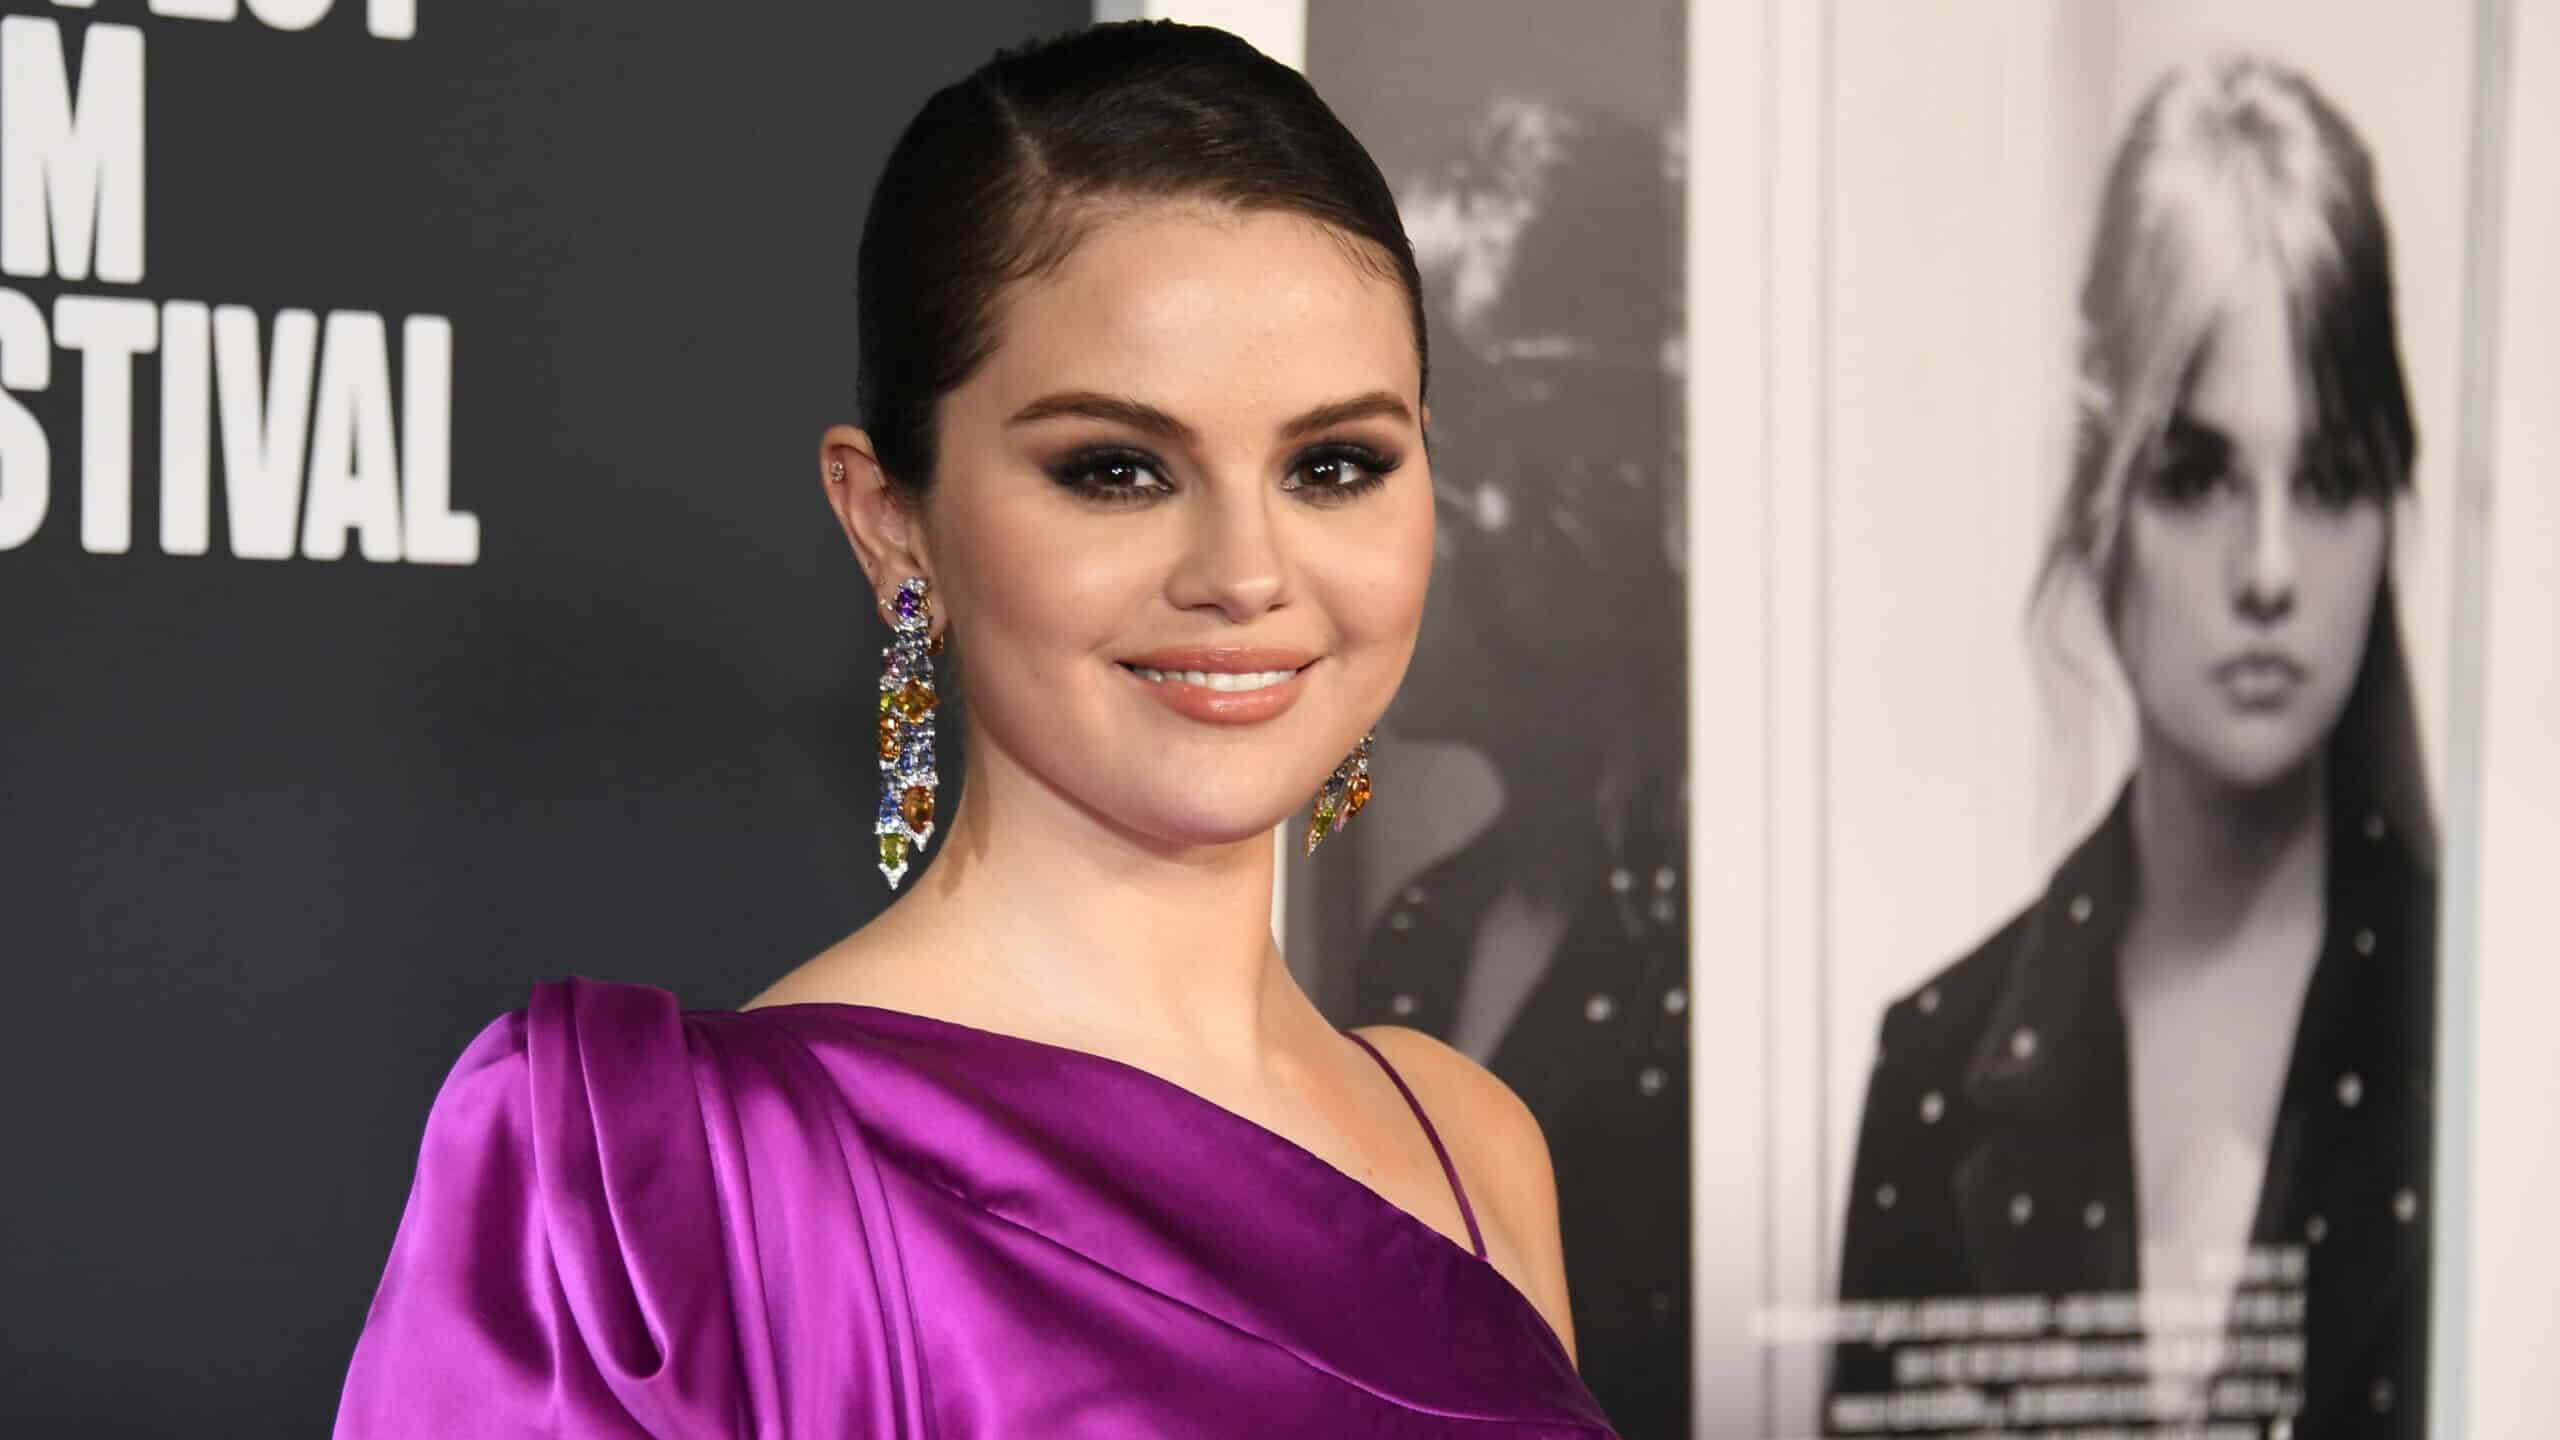 Selena Gomez attends 2022 AFI Fest - "Selena Gomez: My Mind And Me" Opening Night World Premiere at TCL Chinese Theatre on November 02, 2022 in Hollywood, California.